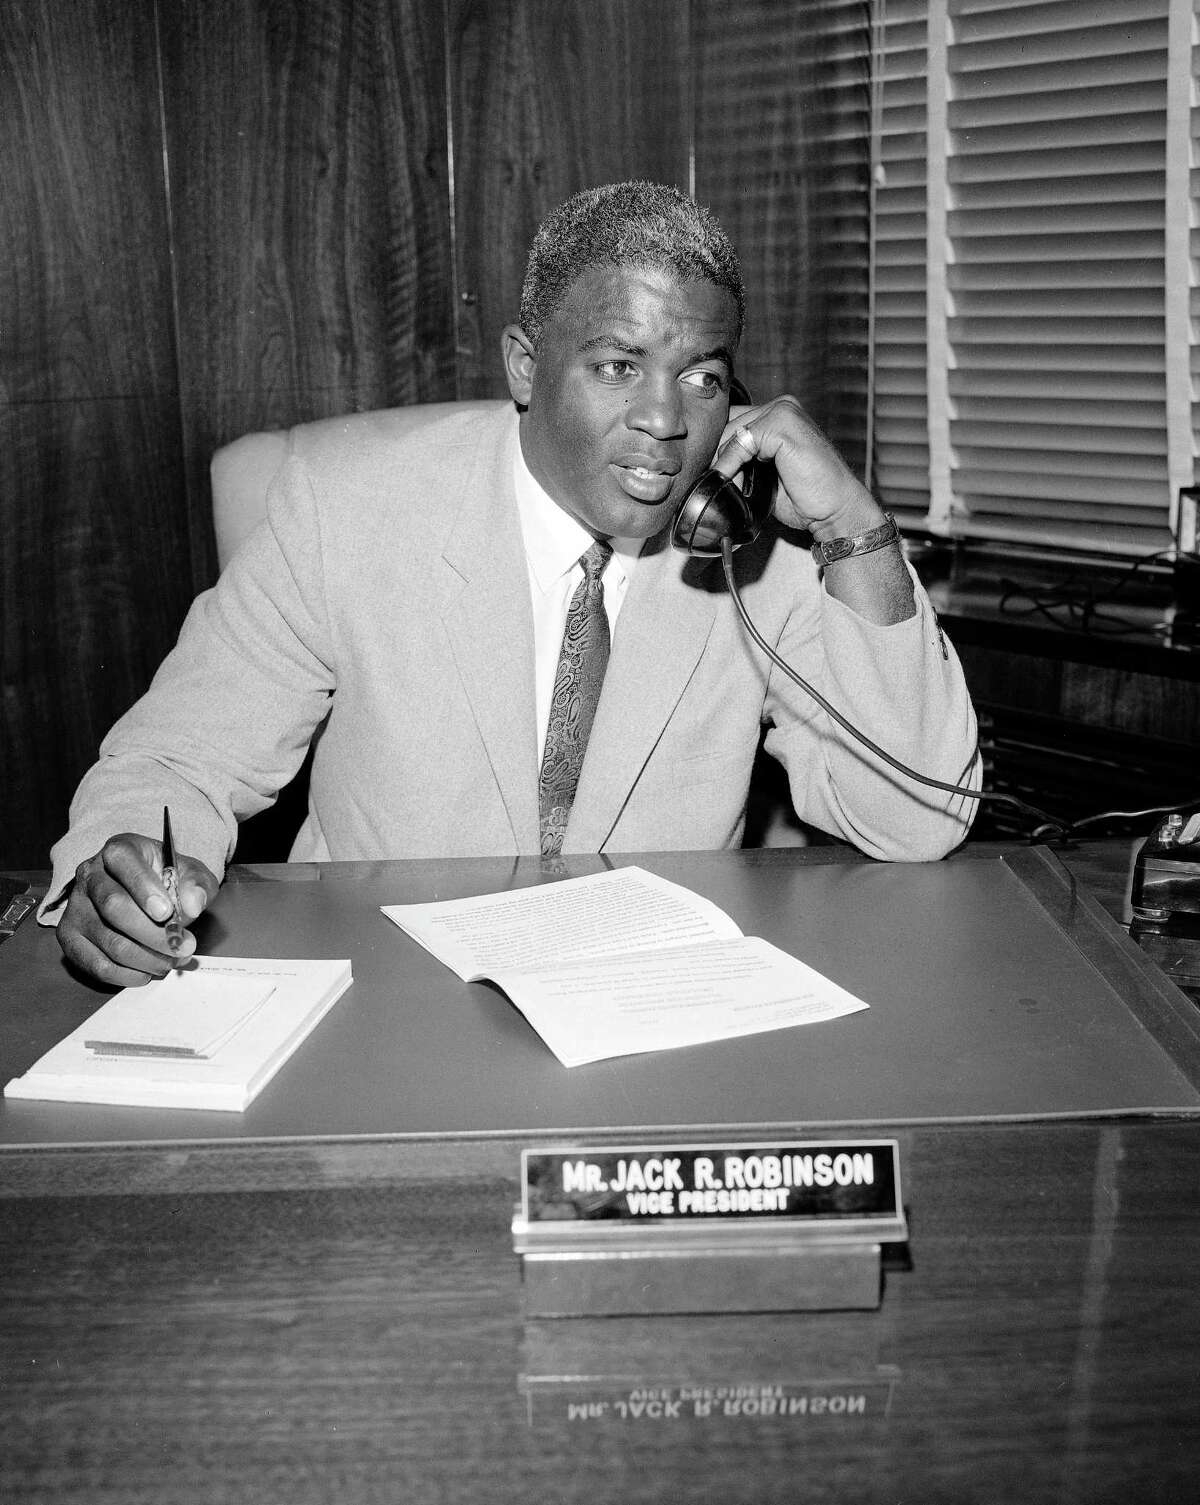 Jackie Robinson's Brooklyn Dodgers contract on view in NYC